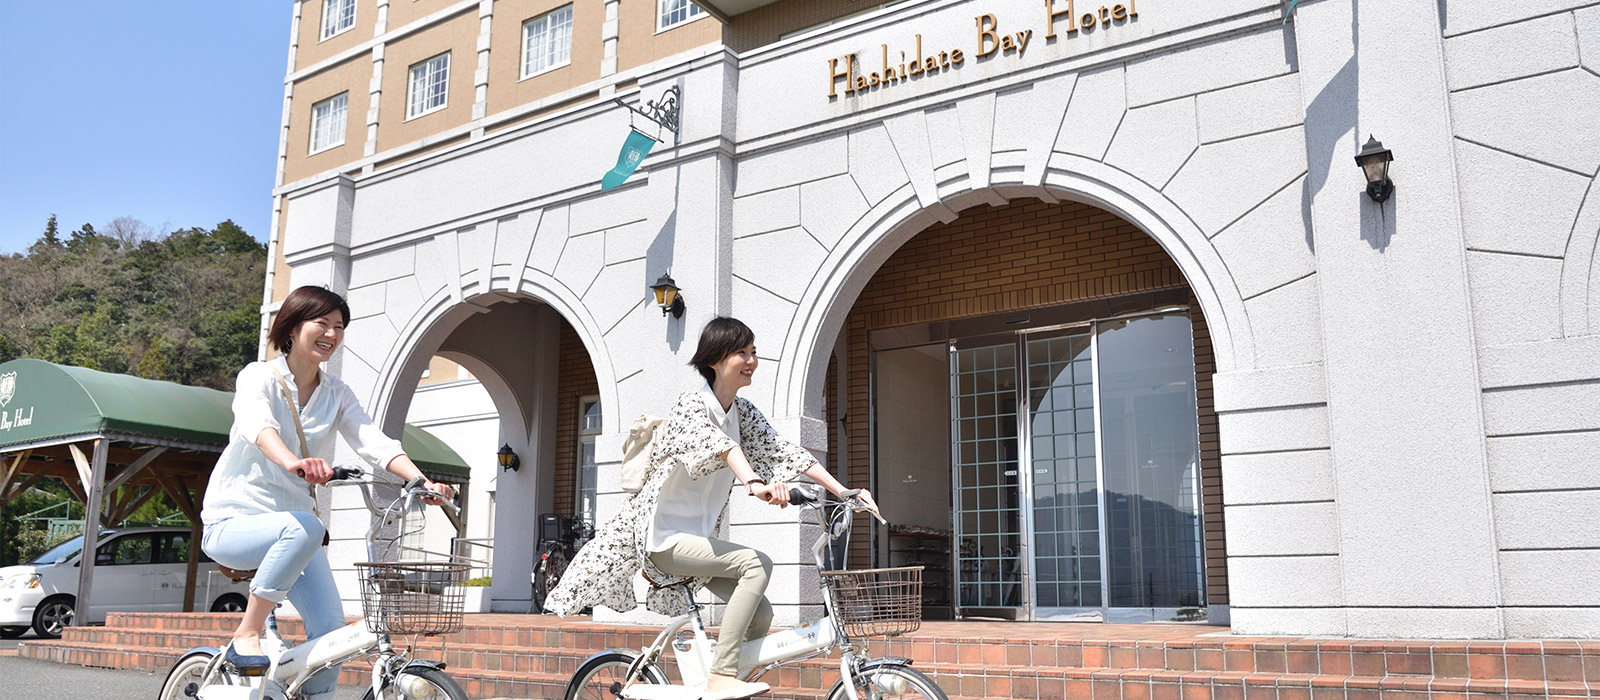 Hashidate bay hotel:bicycle for rent